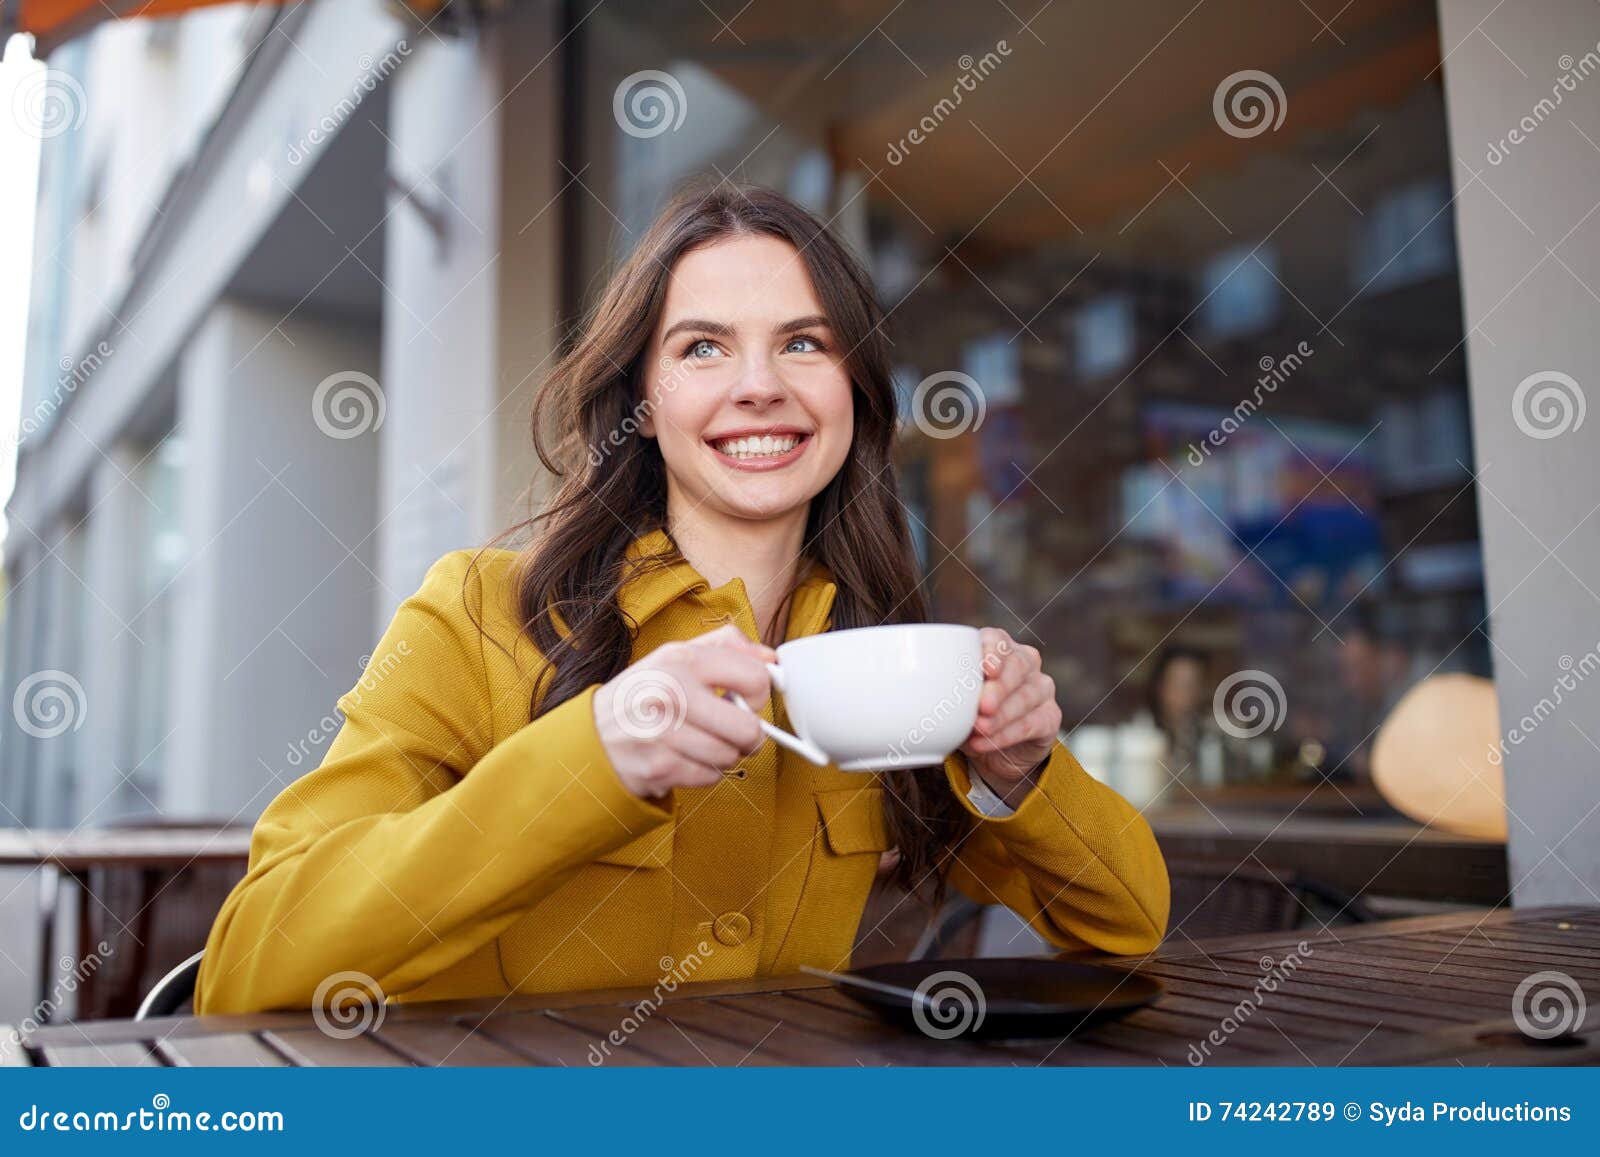 Happy Woman Drinking Cocoa at City Street Cafe Stock Image - Image of ...